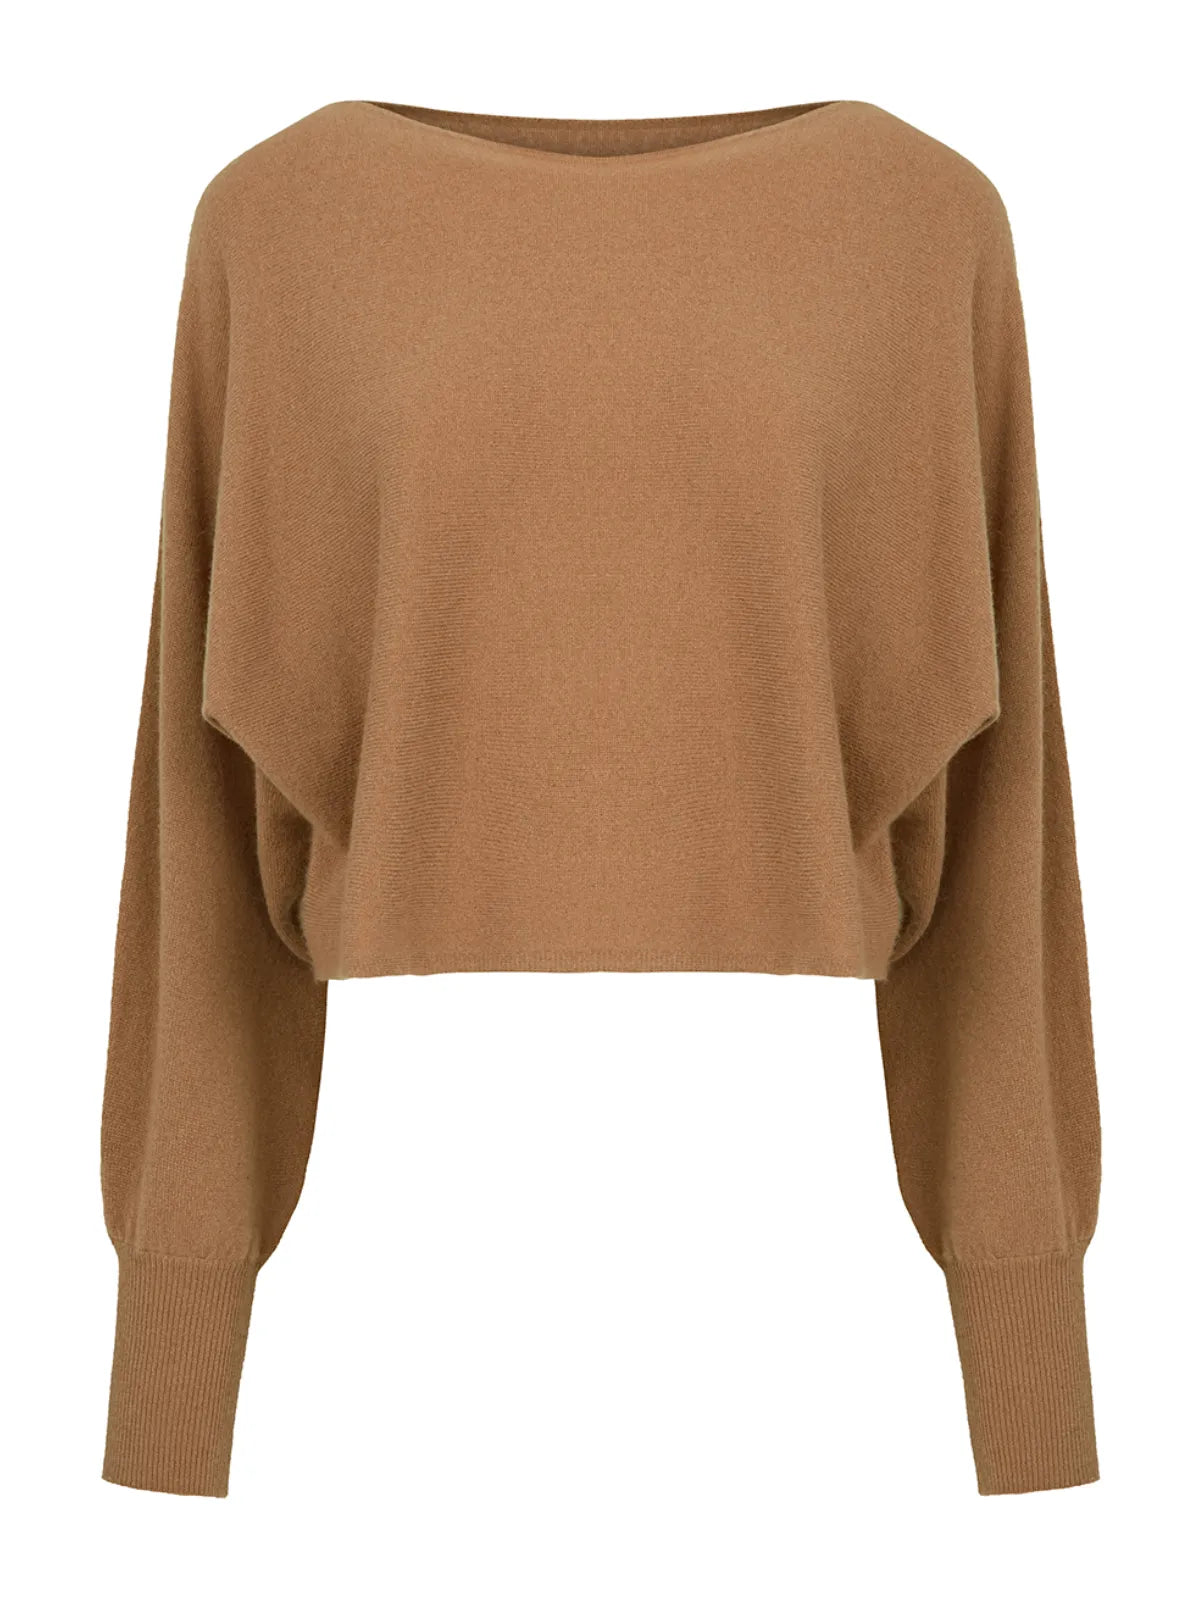 Achieve a look of modern elegance with this short-length cashmere sweater, featuring classic batwing sleeves and a solid color design, ideal for versatile and stylish winter outfits.